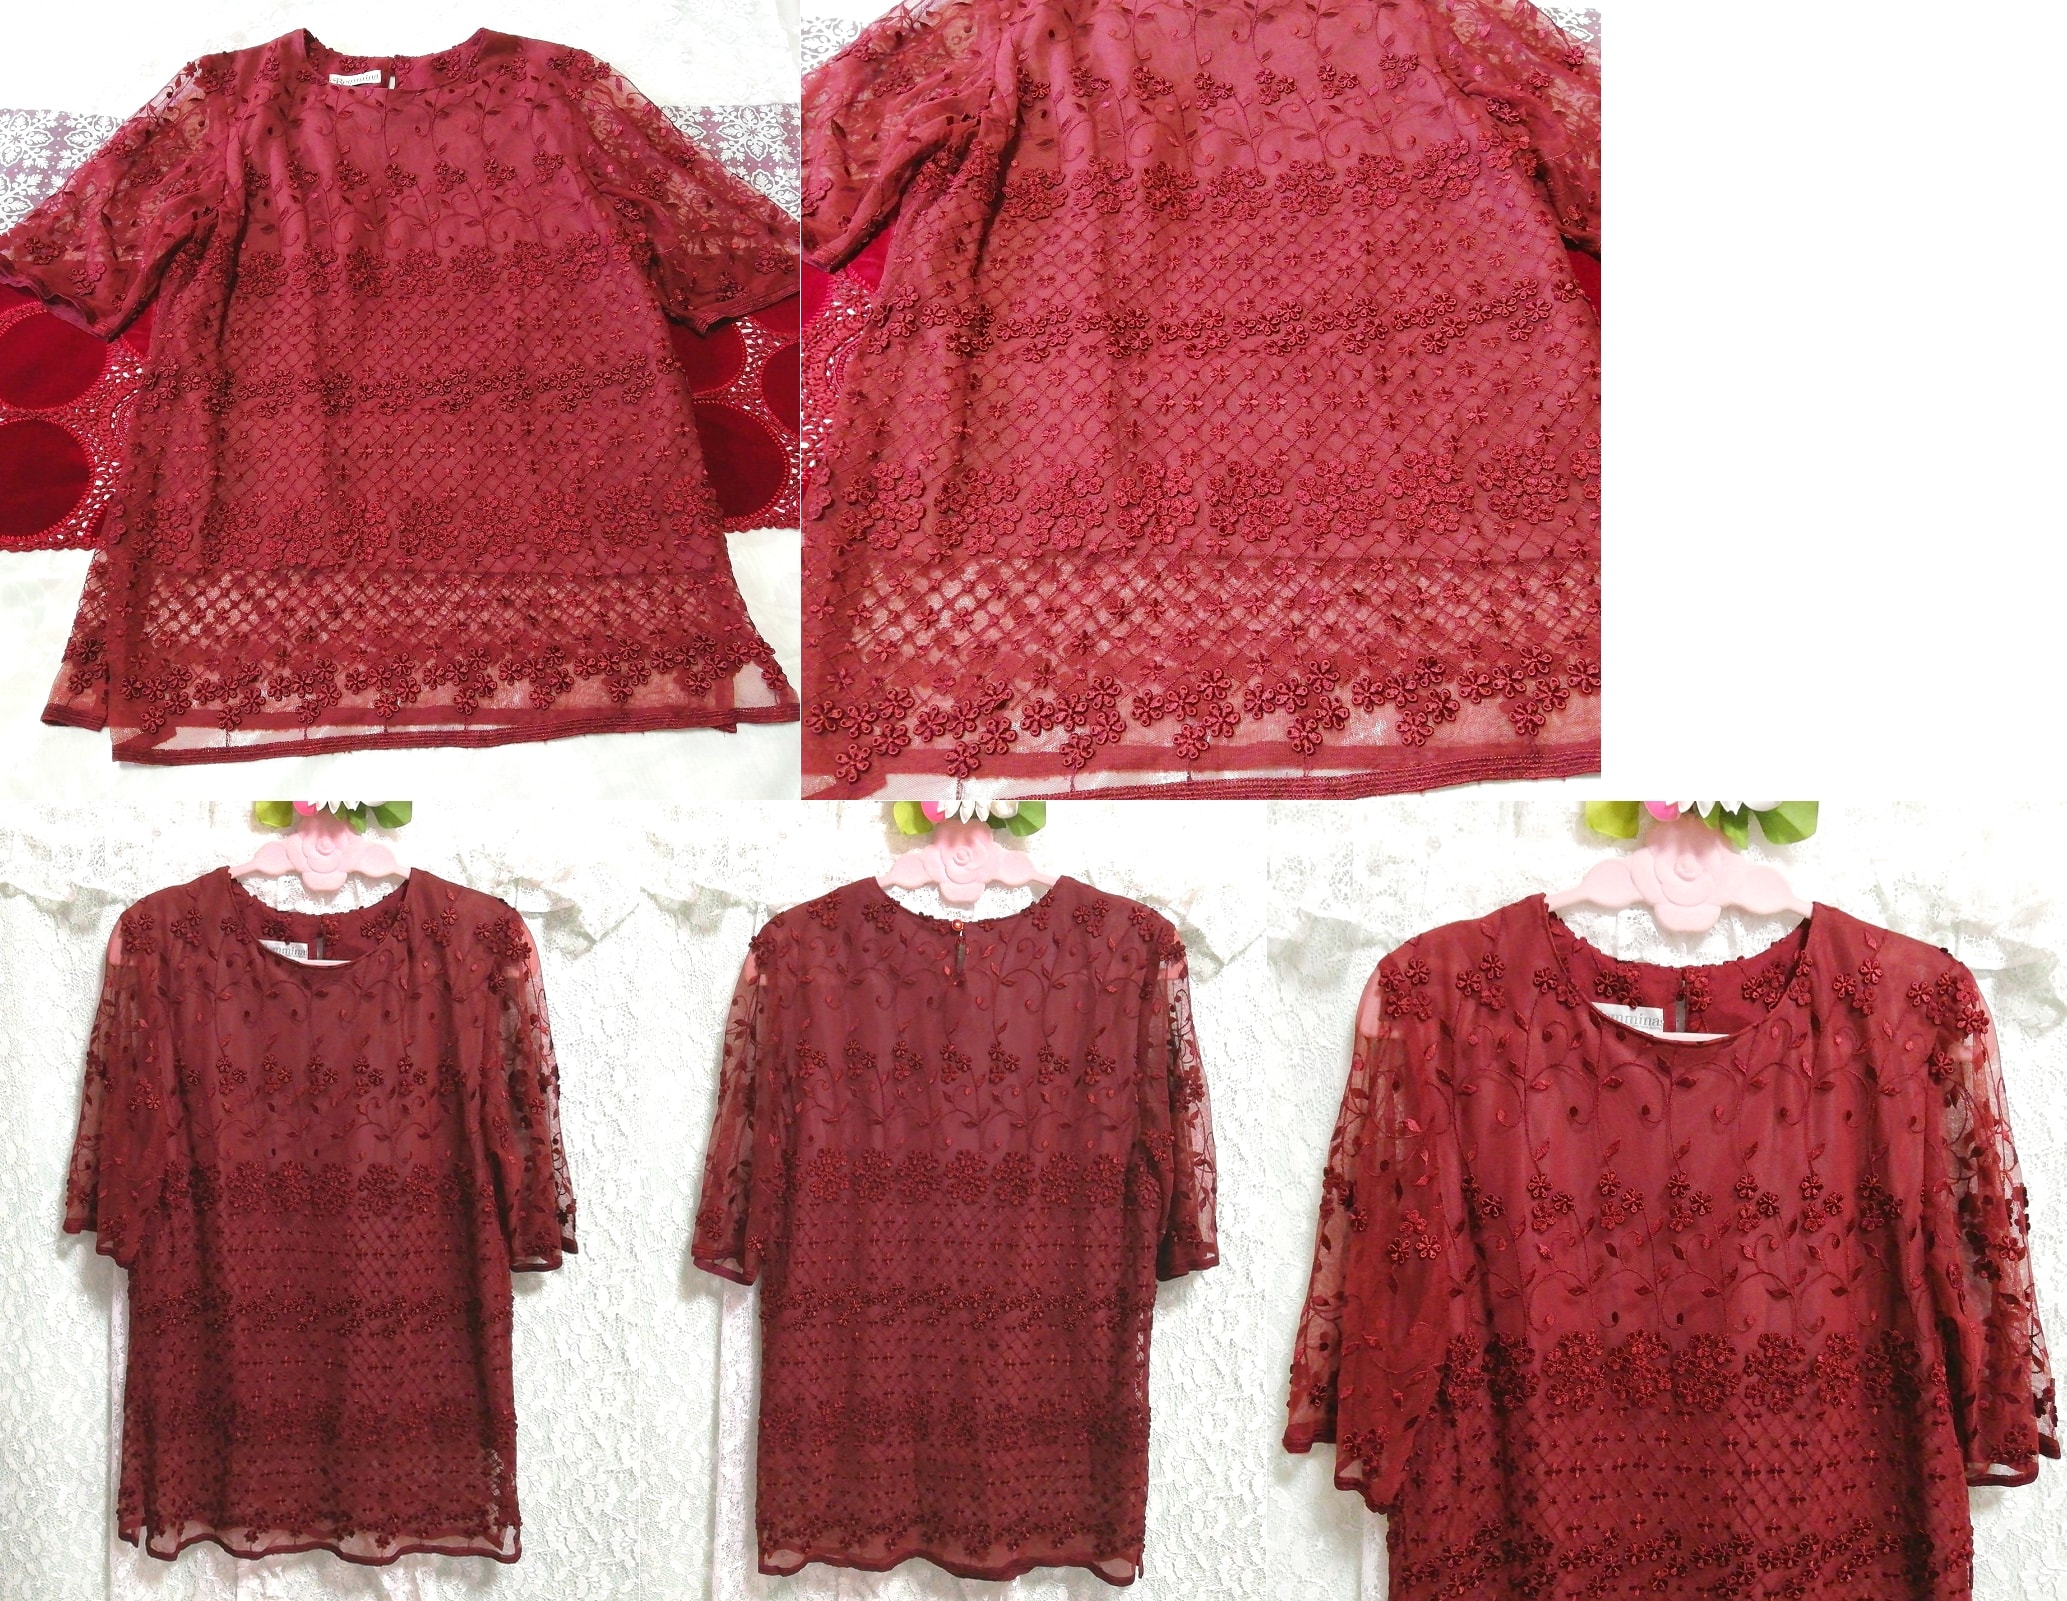 Red wine red floral lace short sleeve tunic negligee nightgown nightwear dress, tunic, long sleeve, m size